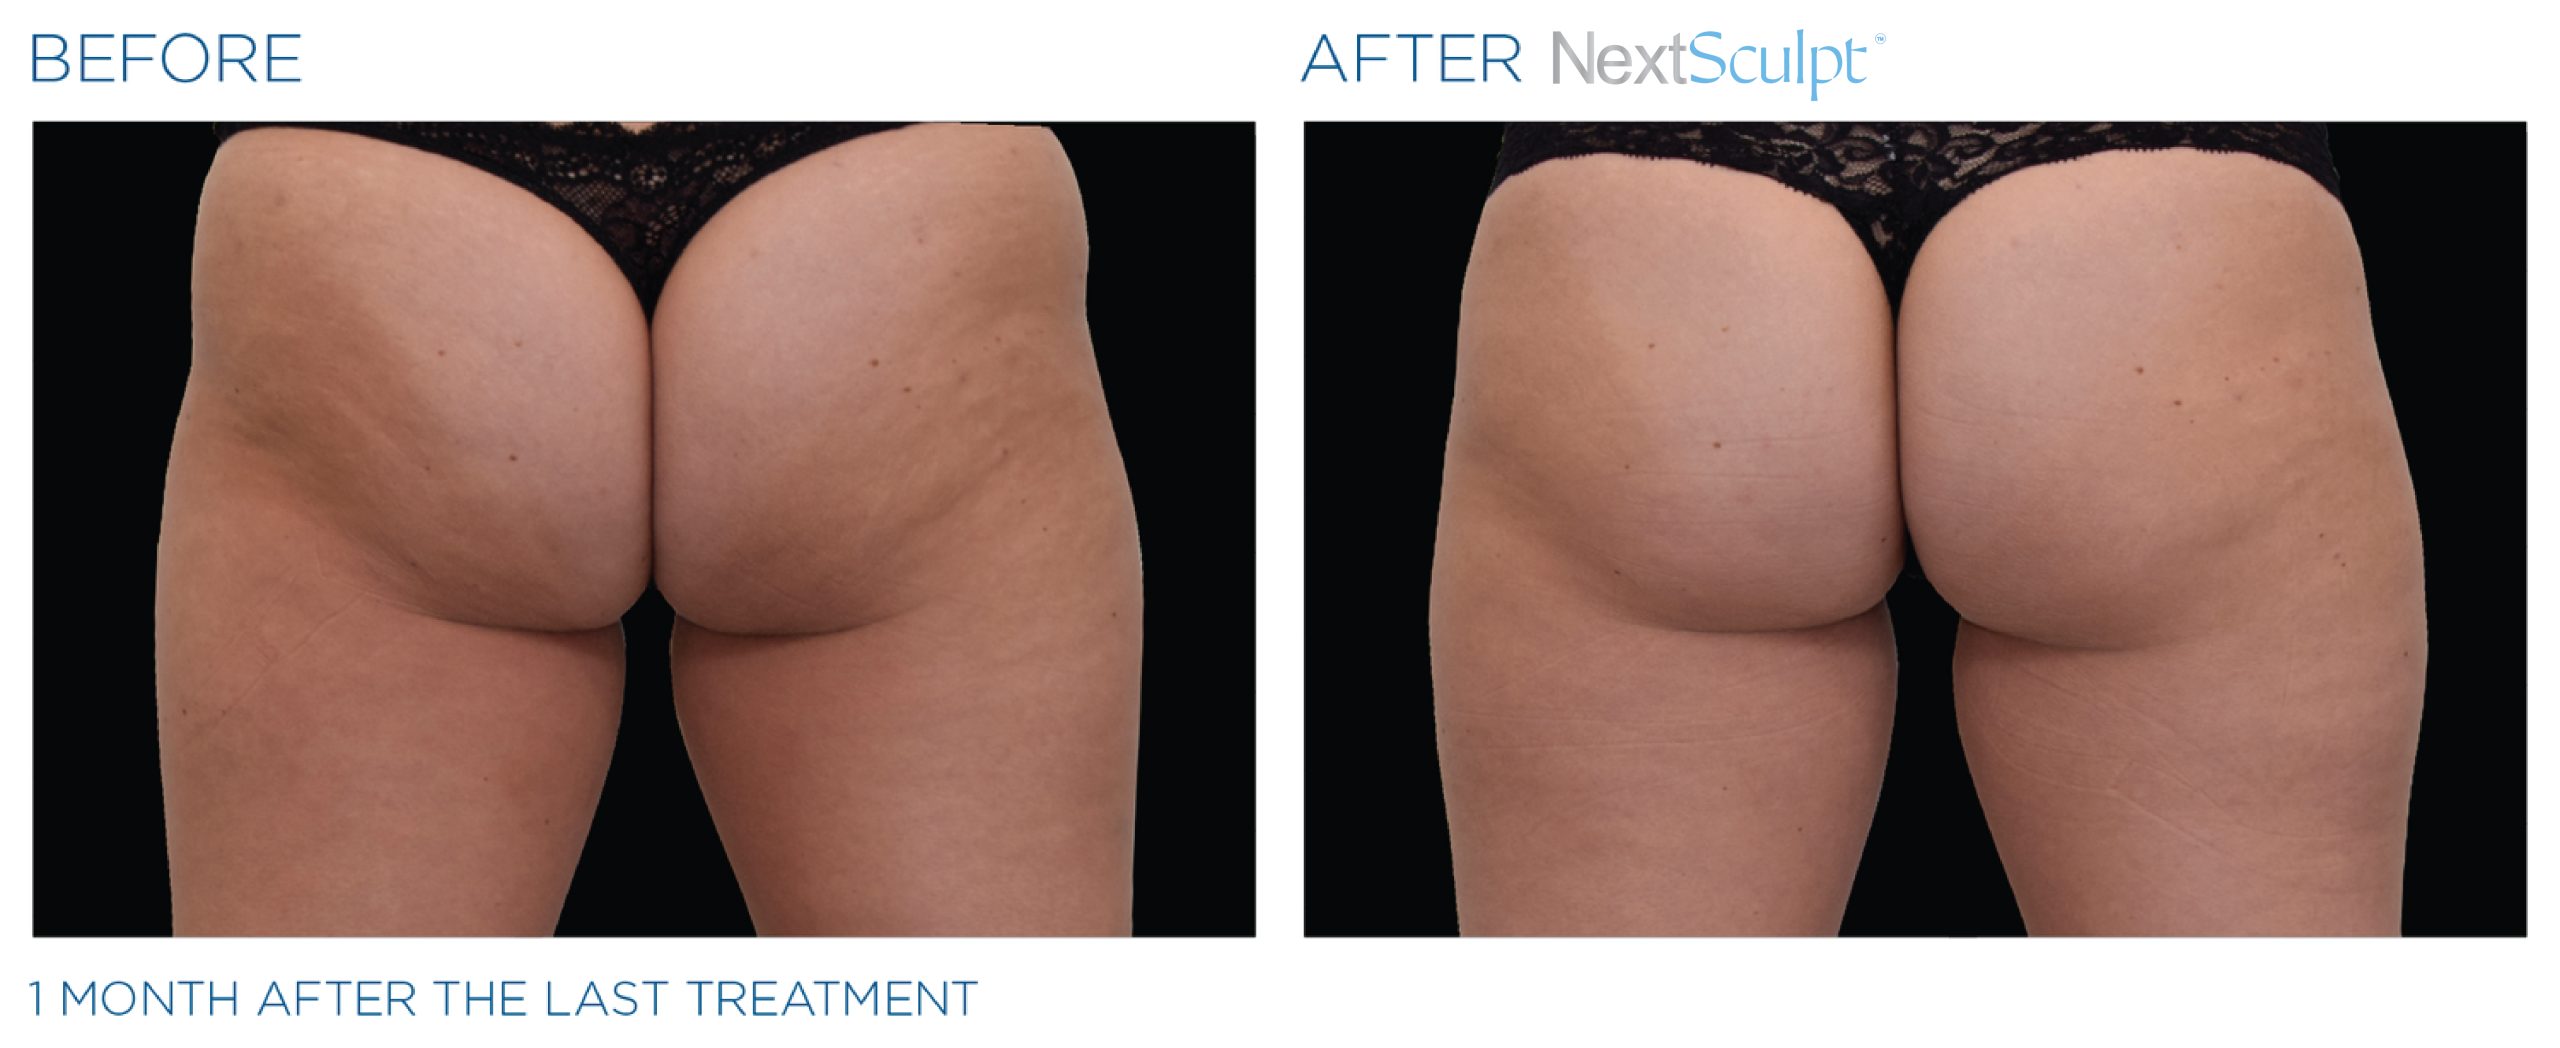 nextsculpt-before-after-12-scaled.jpg